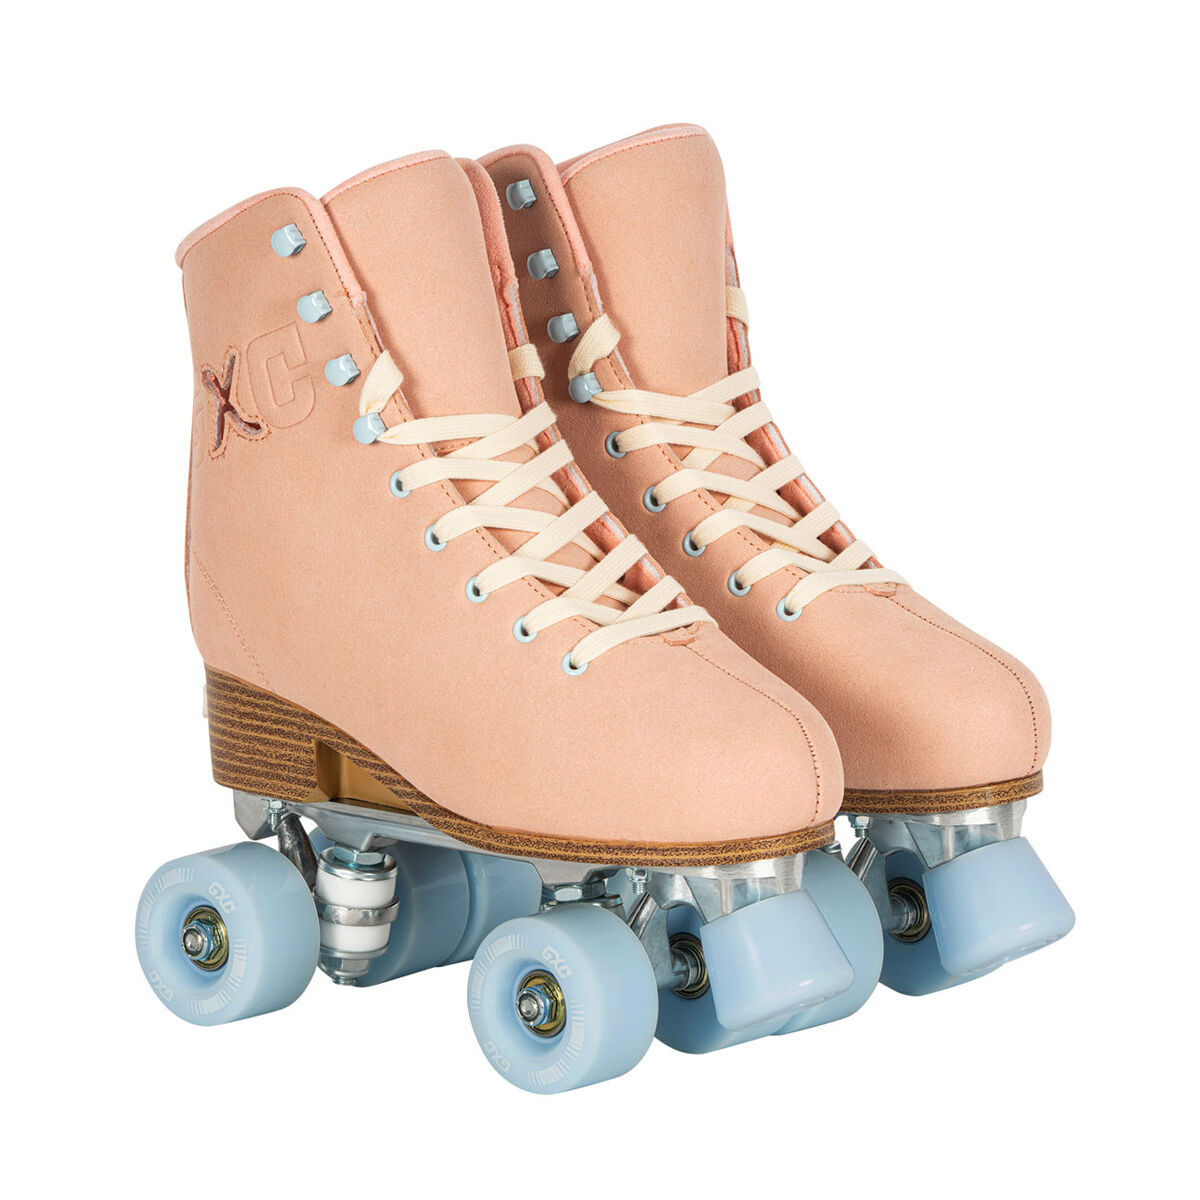 Rollers rose taille 26-30 SUN and SPORT : King Jouet, Skates